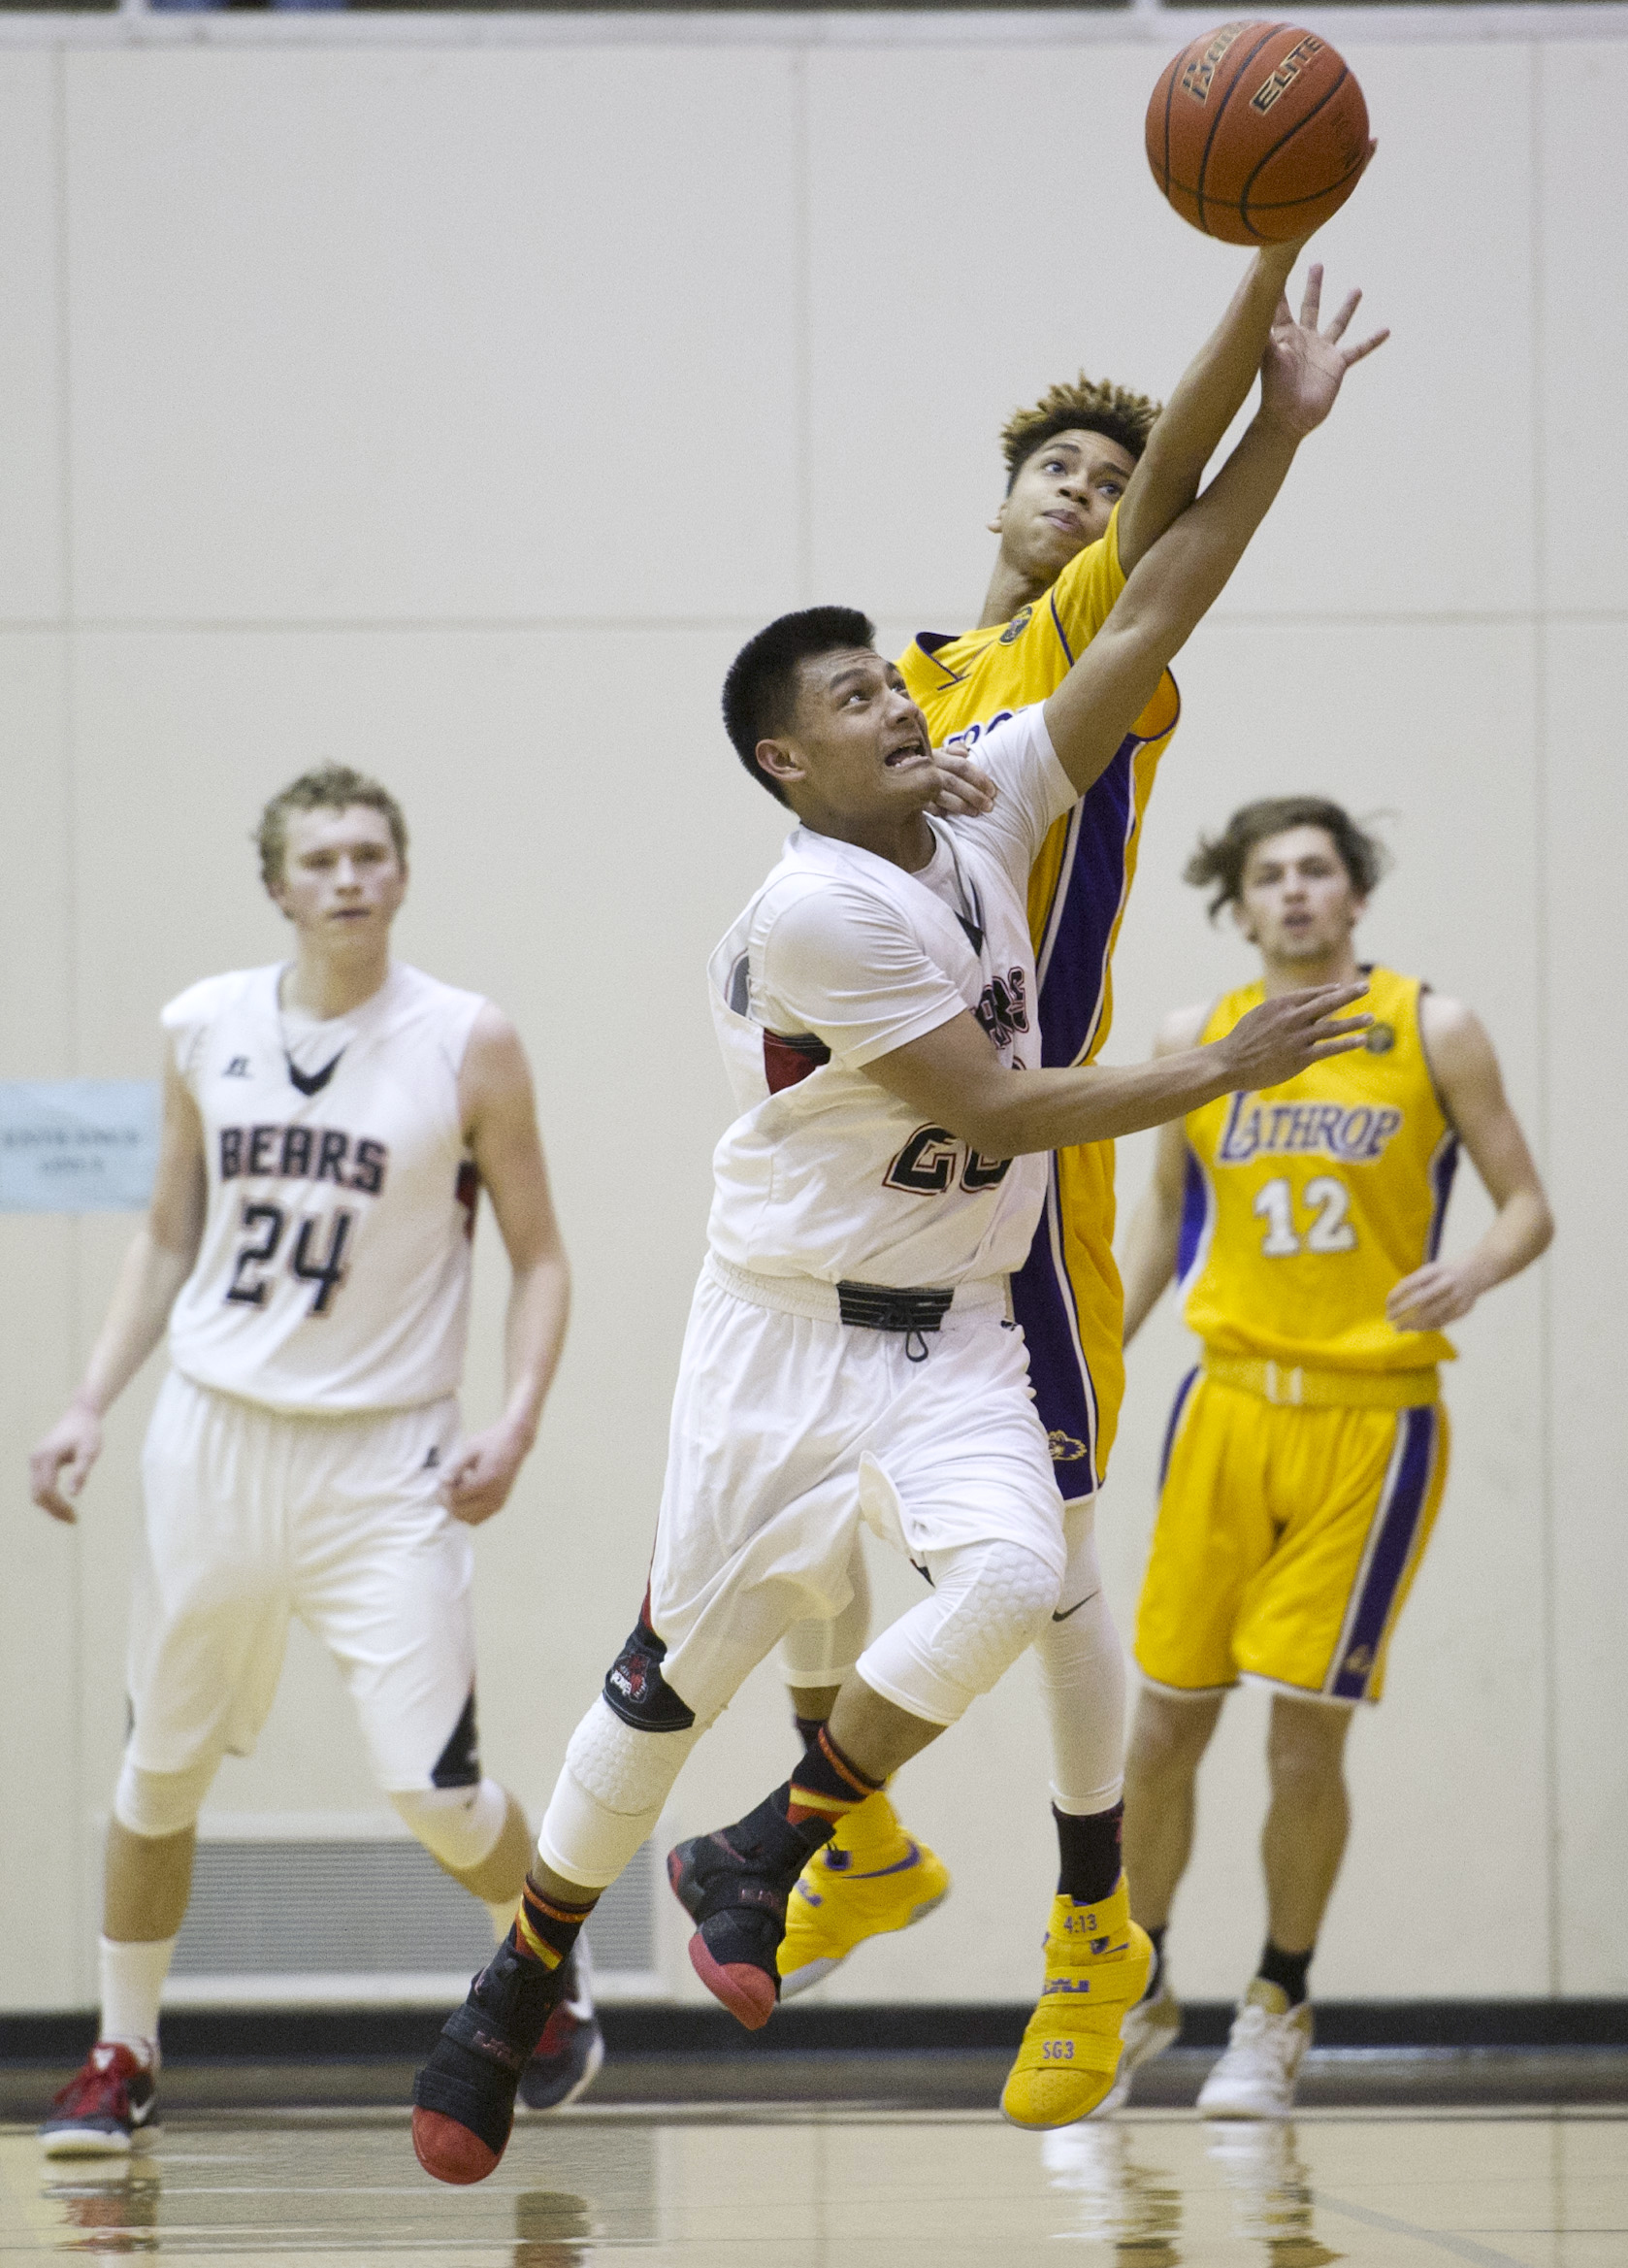 Juneau-Douglas’ Ulyx Bohulano compete against Lathrop’s Jeremiah Handy for the ball at JDHS on Friday, Feb. 10, 2017. JDHS won 50-43. (Michael Penn | Juneau Empire)